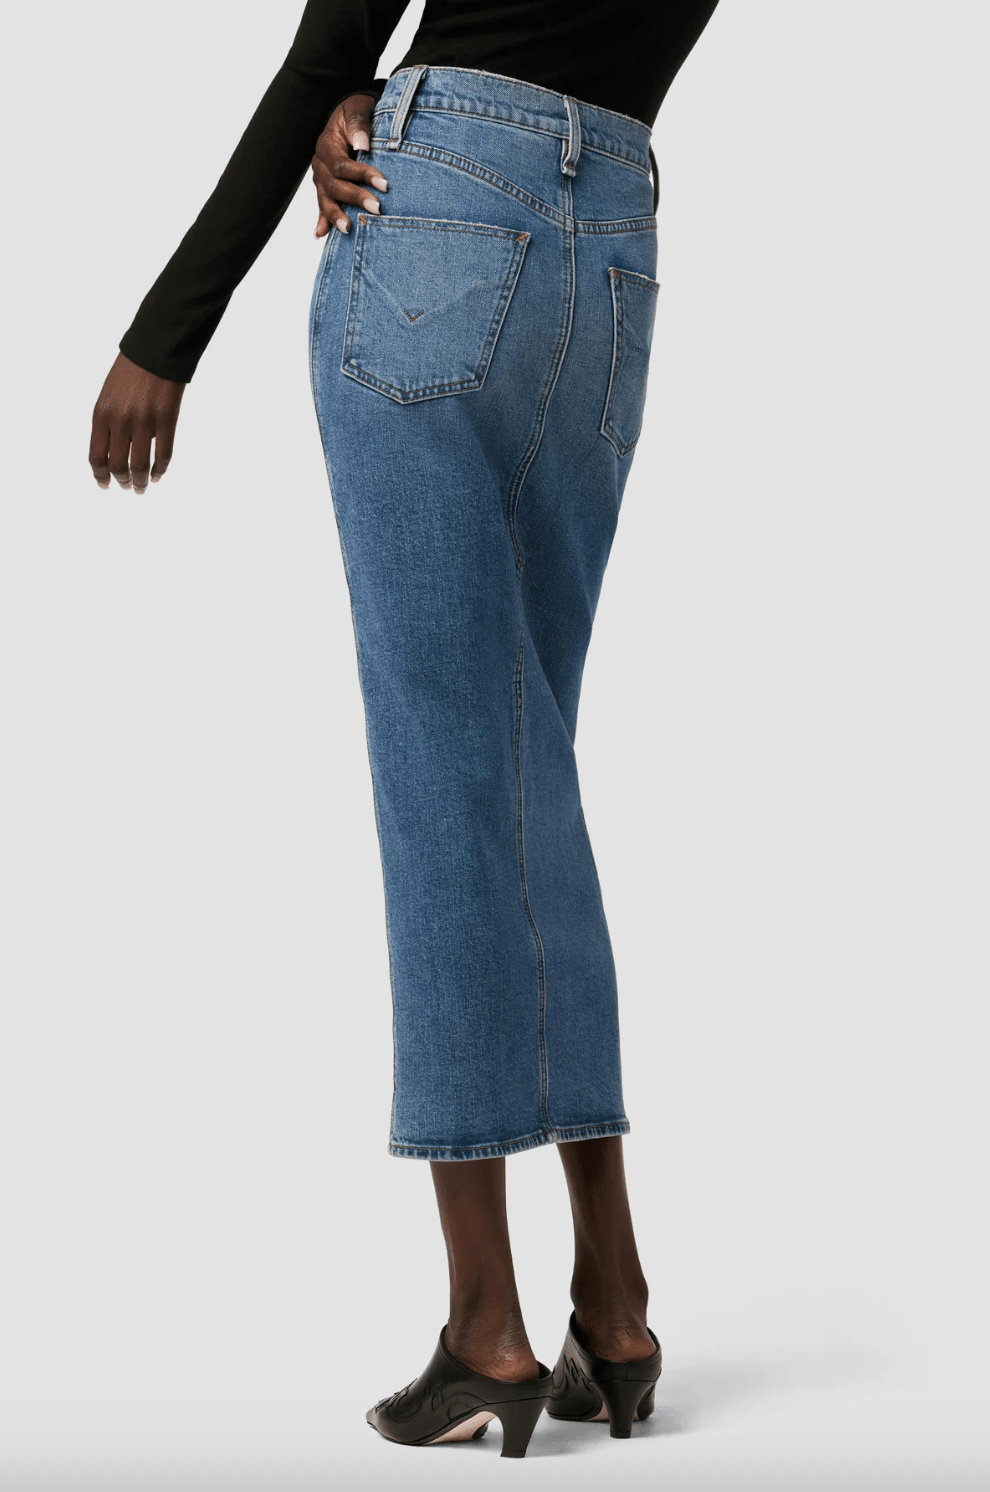 Reconstructed Midi Jean Skirt by Hudson